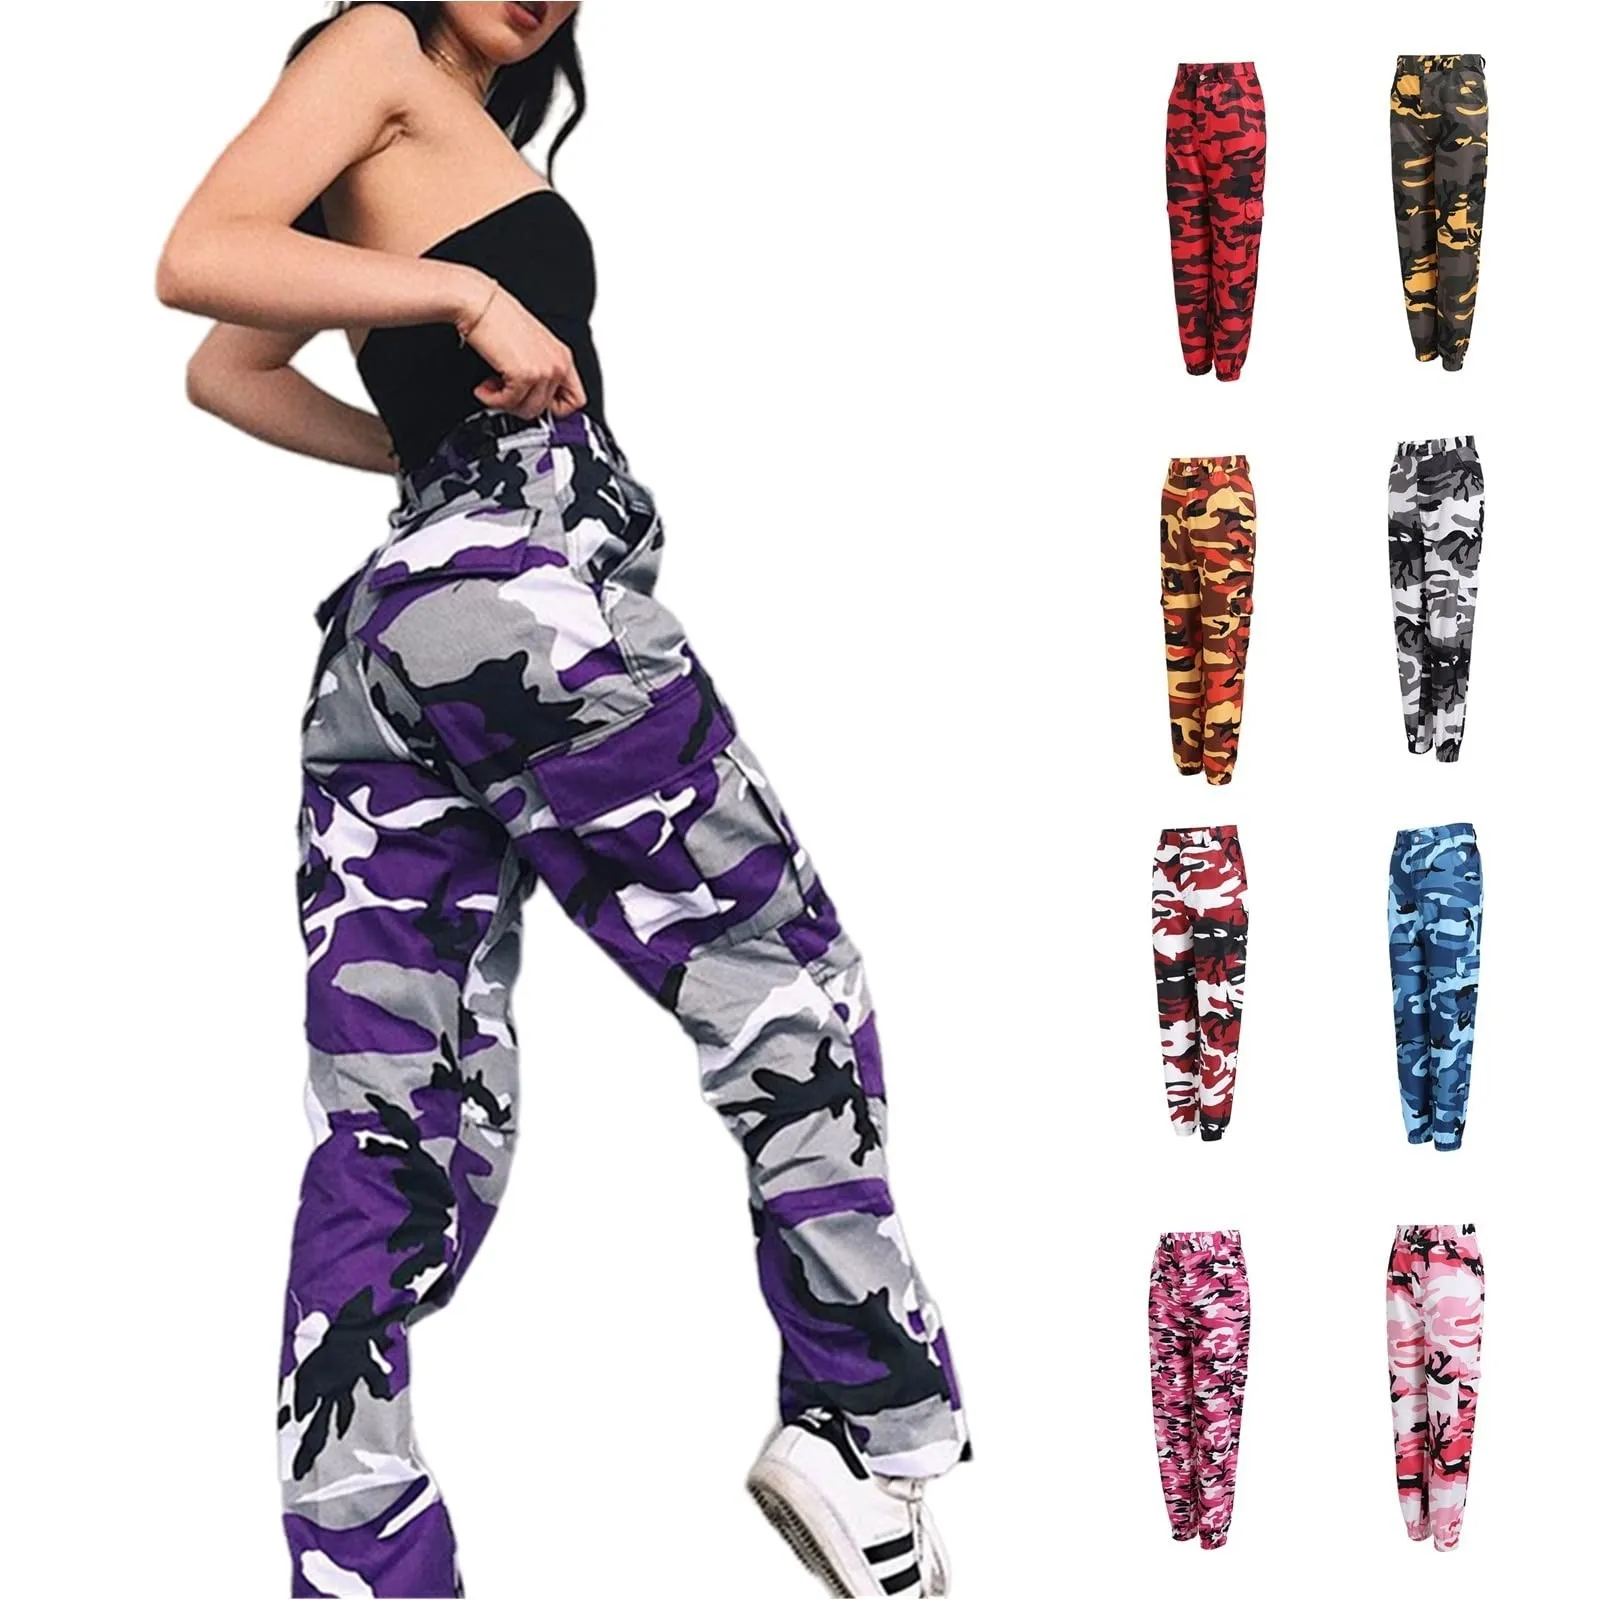 

Ladies Casual Fashion All-Match Sports Trendy Cool Camouflage Trousers Y2k Clothes Women' S Pants брюки женские штаны 바지